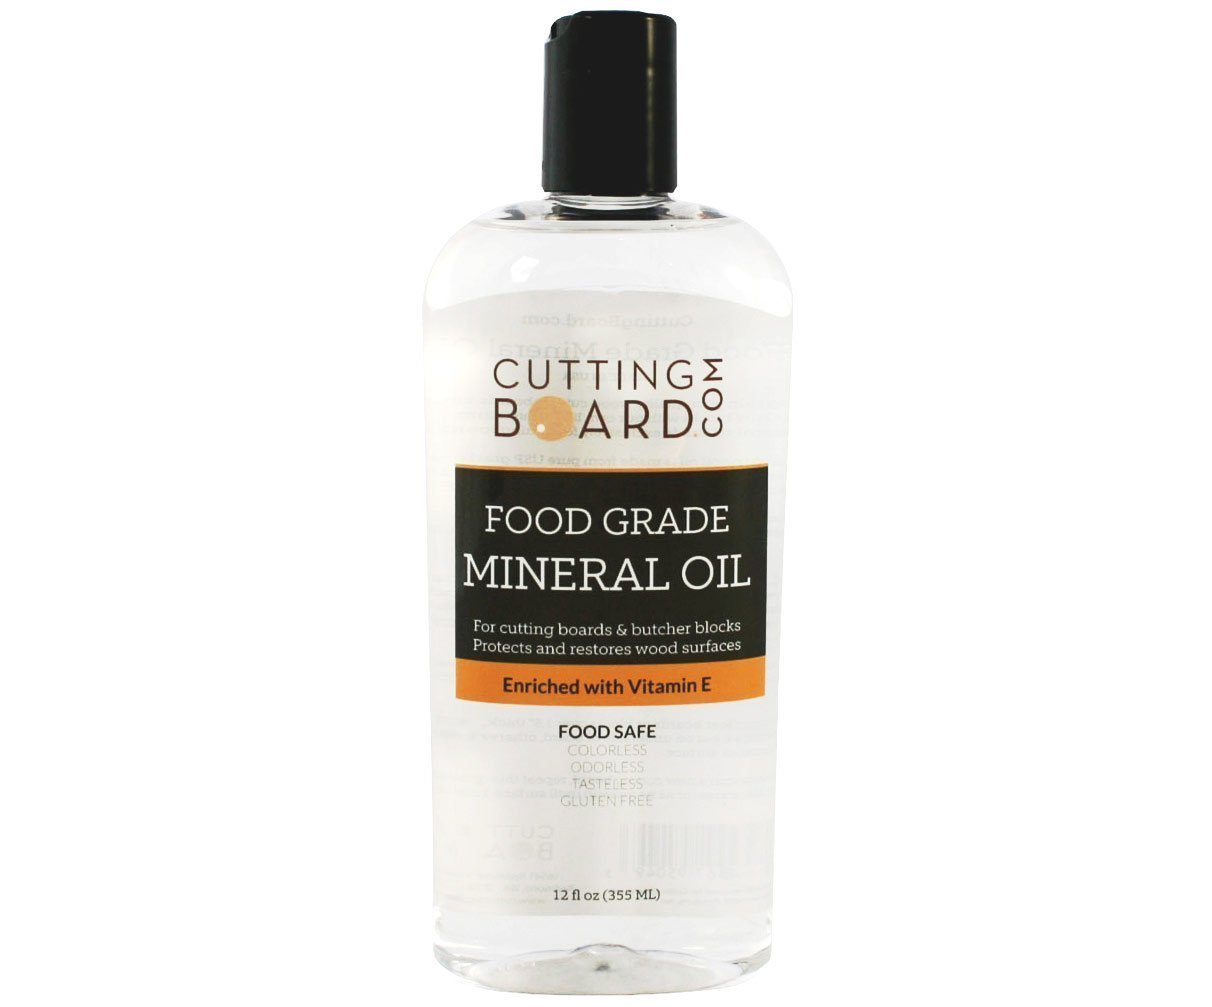 Food Grade Mineral Oil for Cutting Boards, Countertops and Butcher Blocks